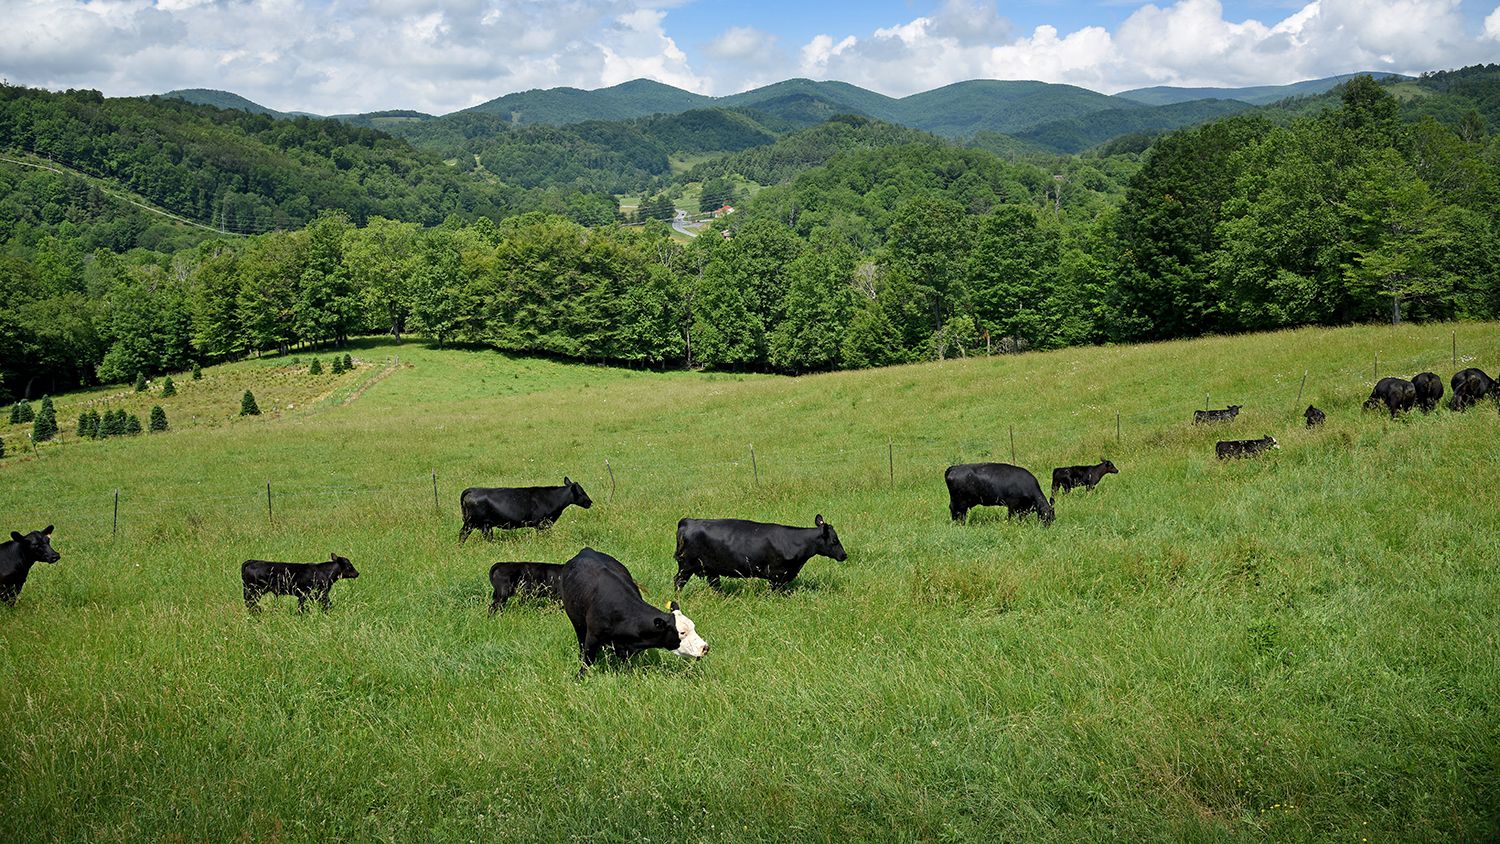 Cattle on a pasture with mountains and trees in the background